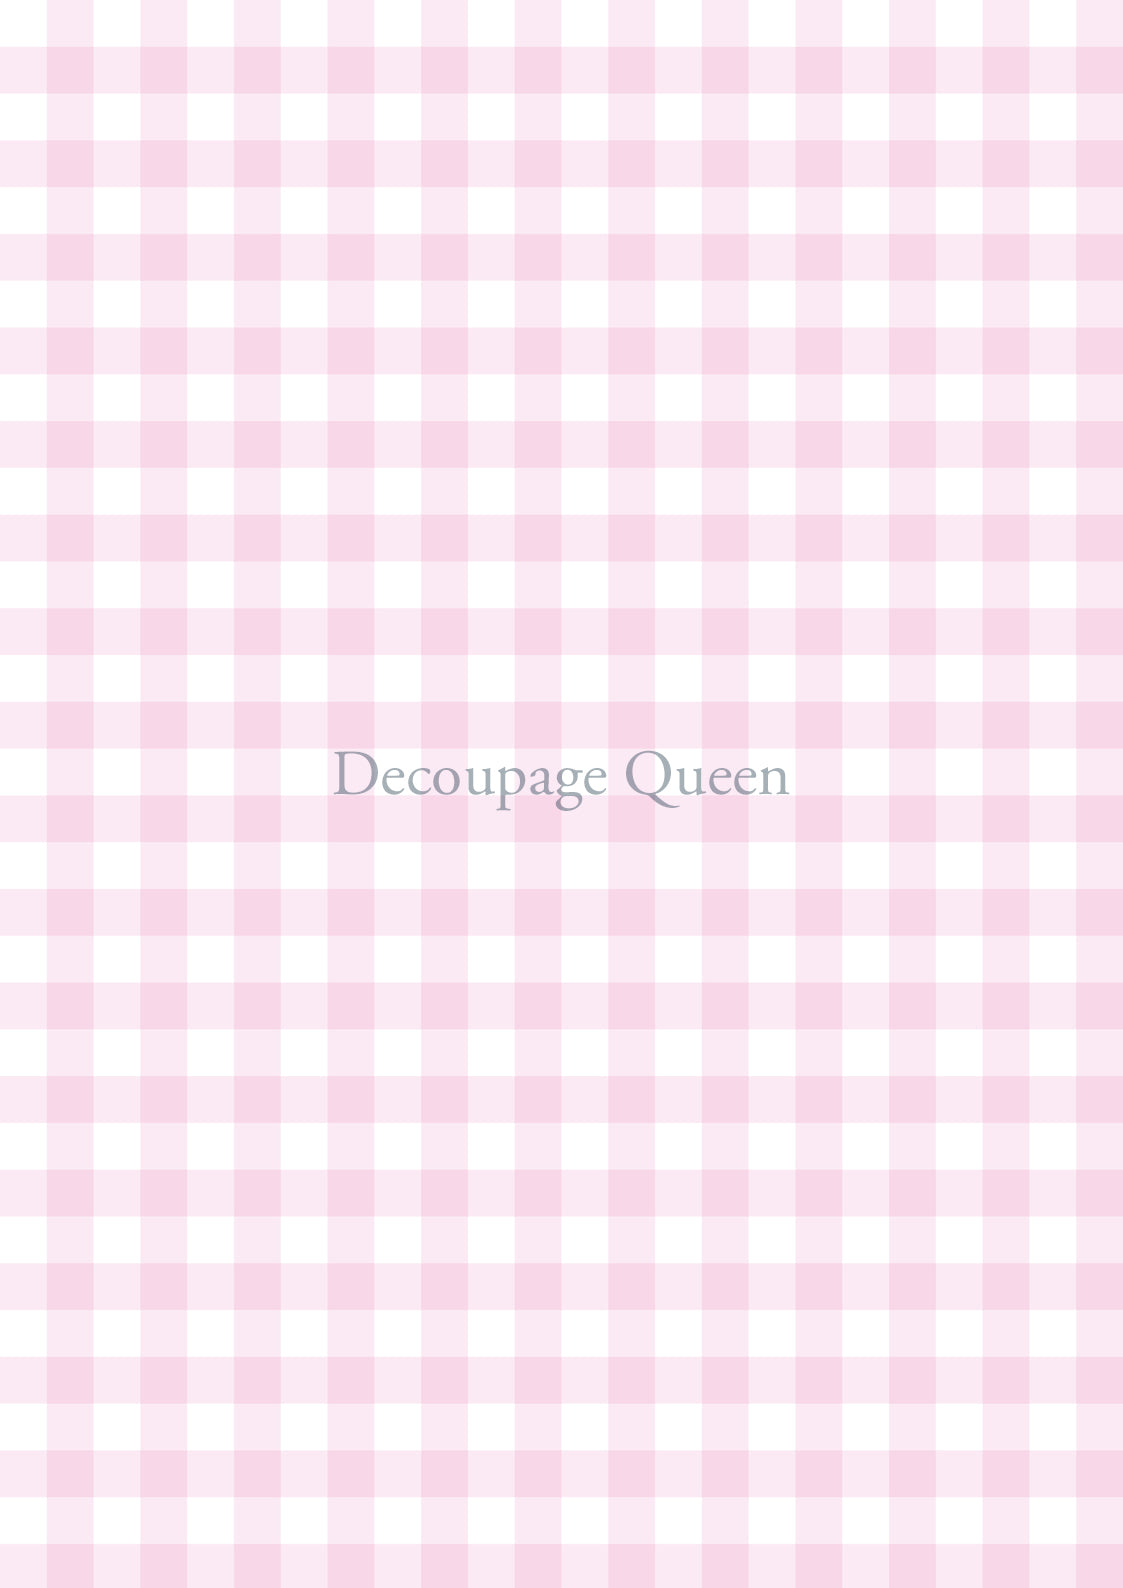 Pink Gingham A4 Rice Paper Decoupage Queen